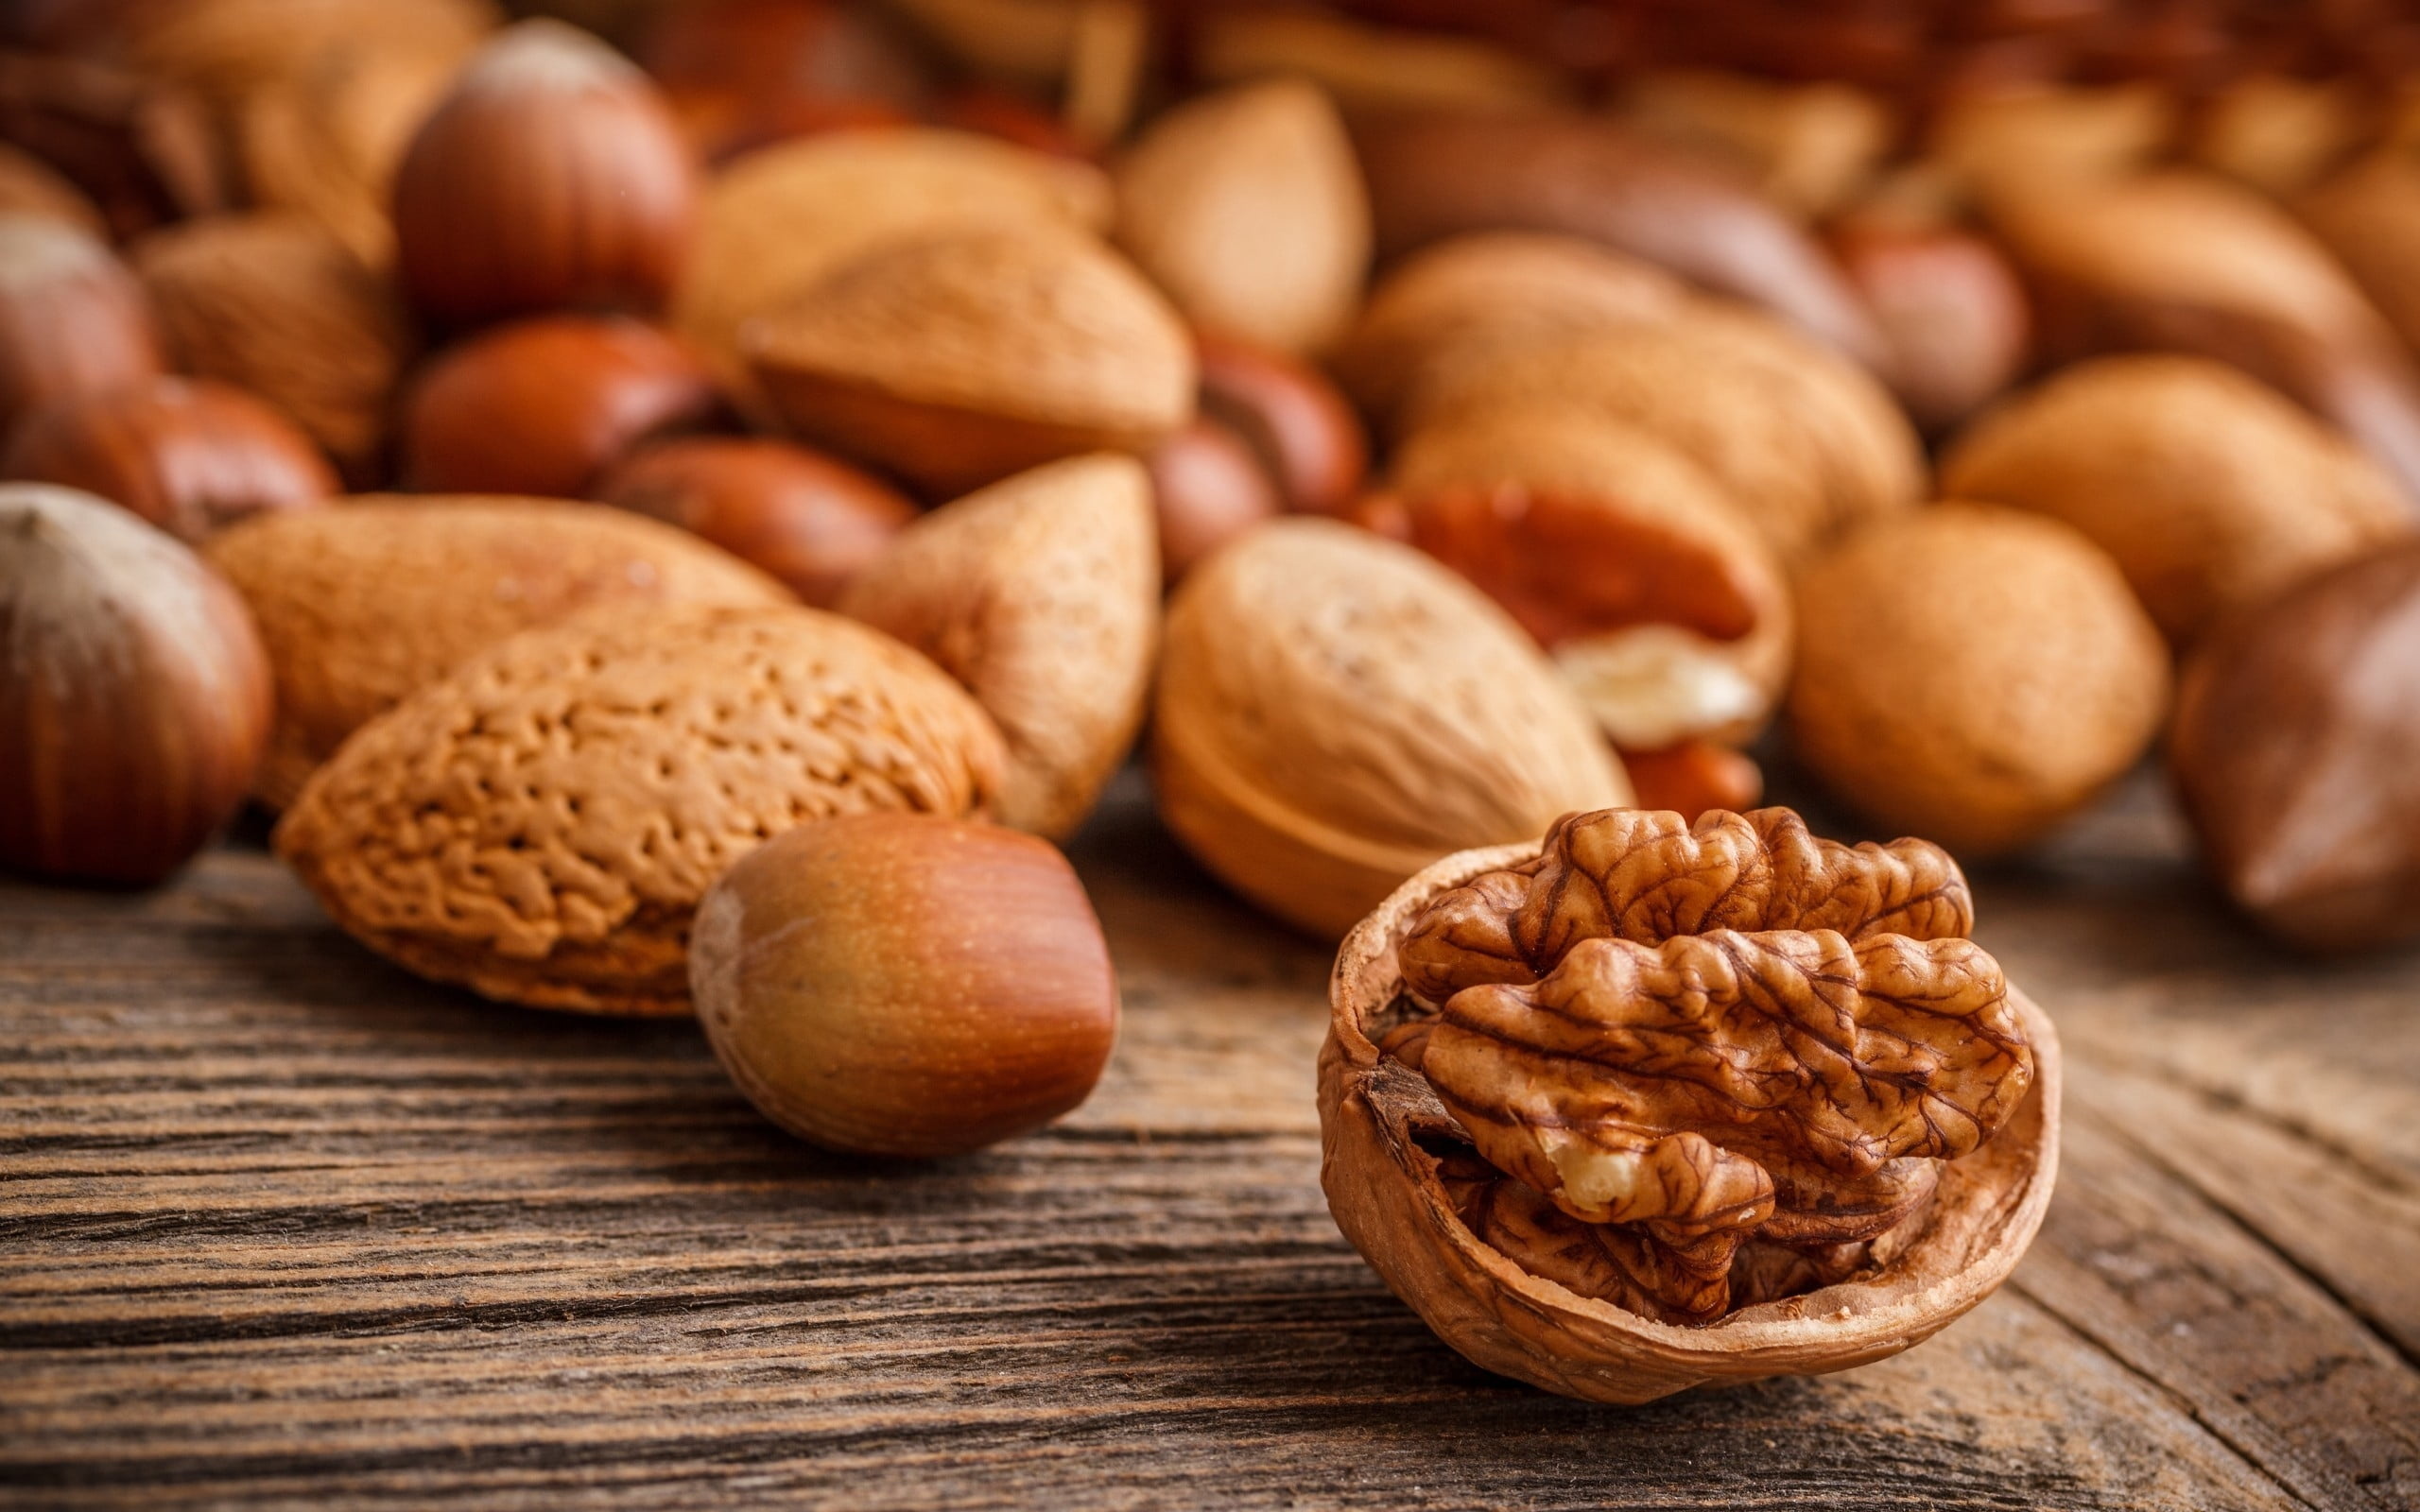 Selective focus photography, Walnut and other nuts, HD wallpaper, Food, 2560x1600 HD Desktop